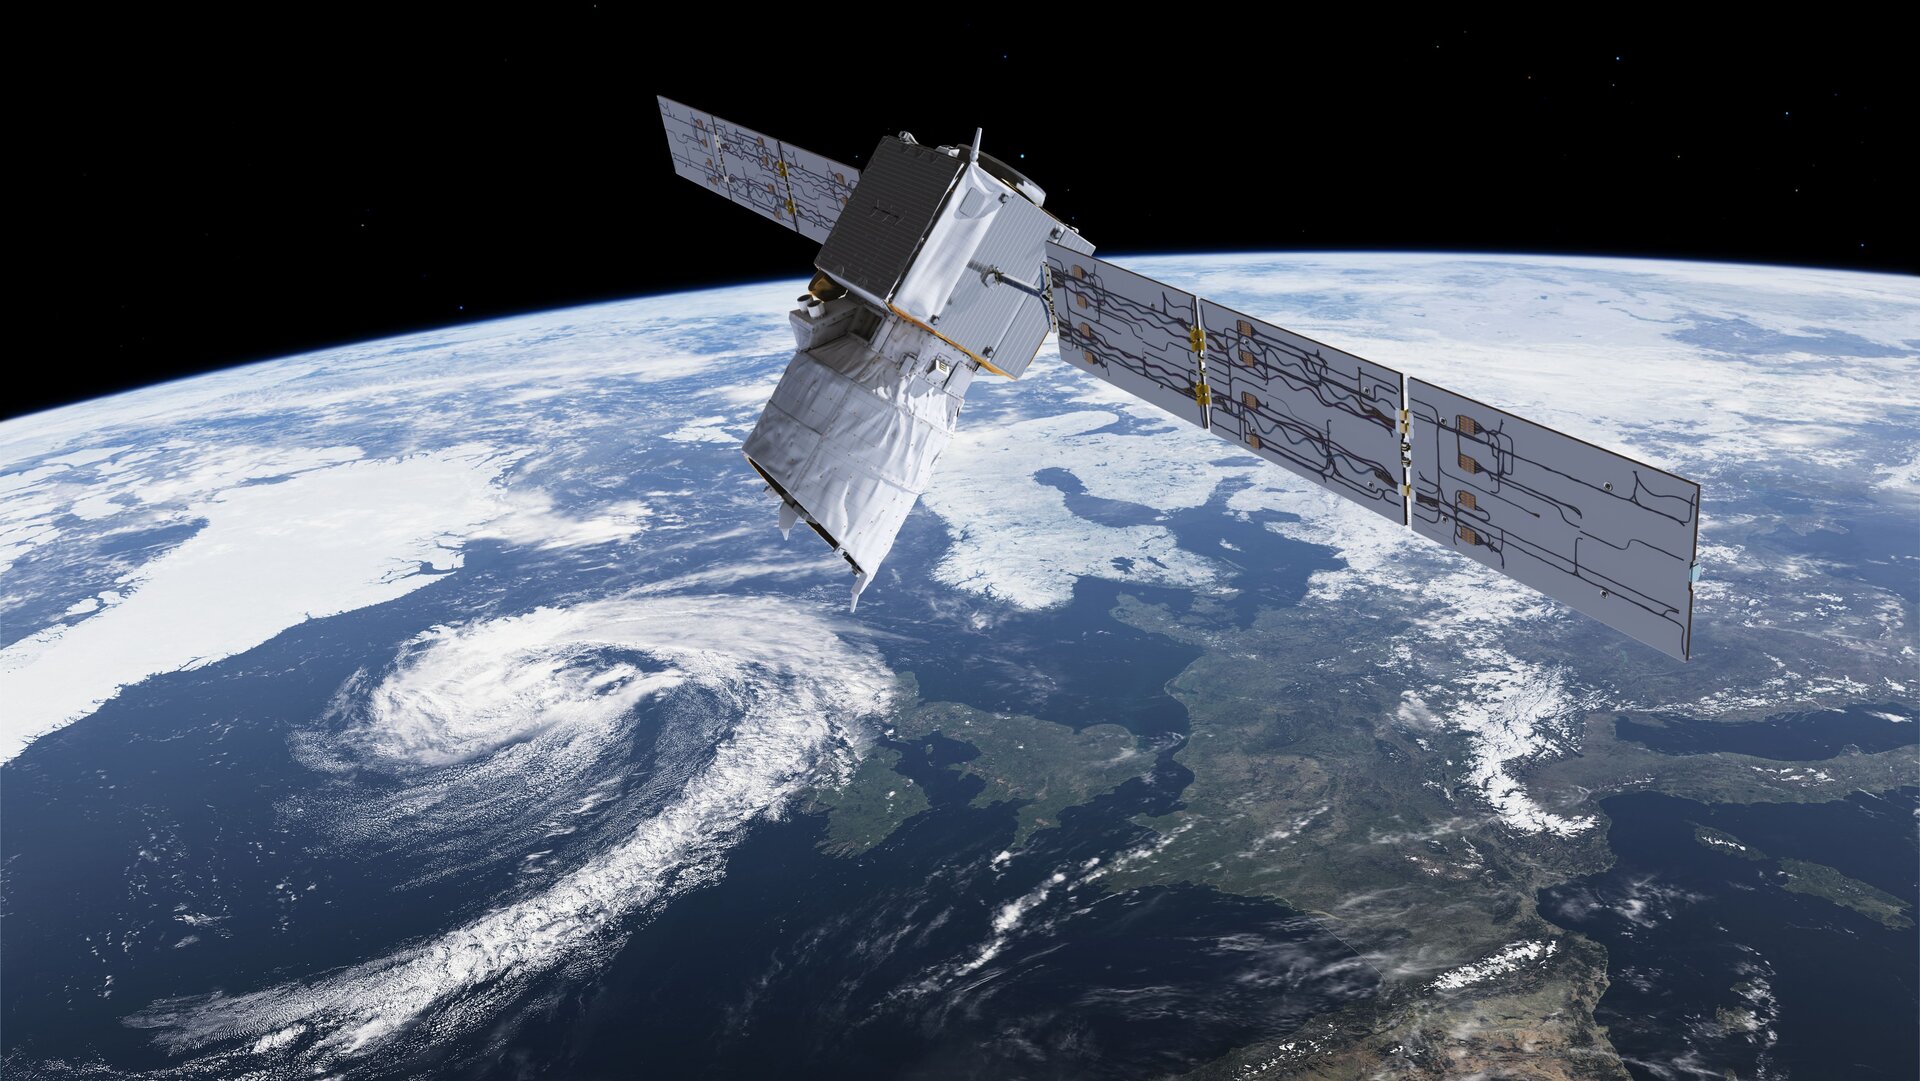 European satellite will fall to Earth today in landmark 'assisted reentry'